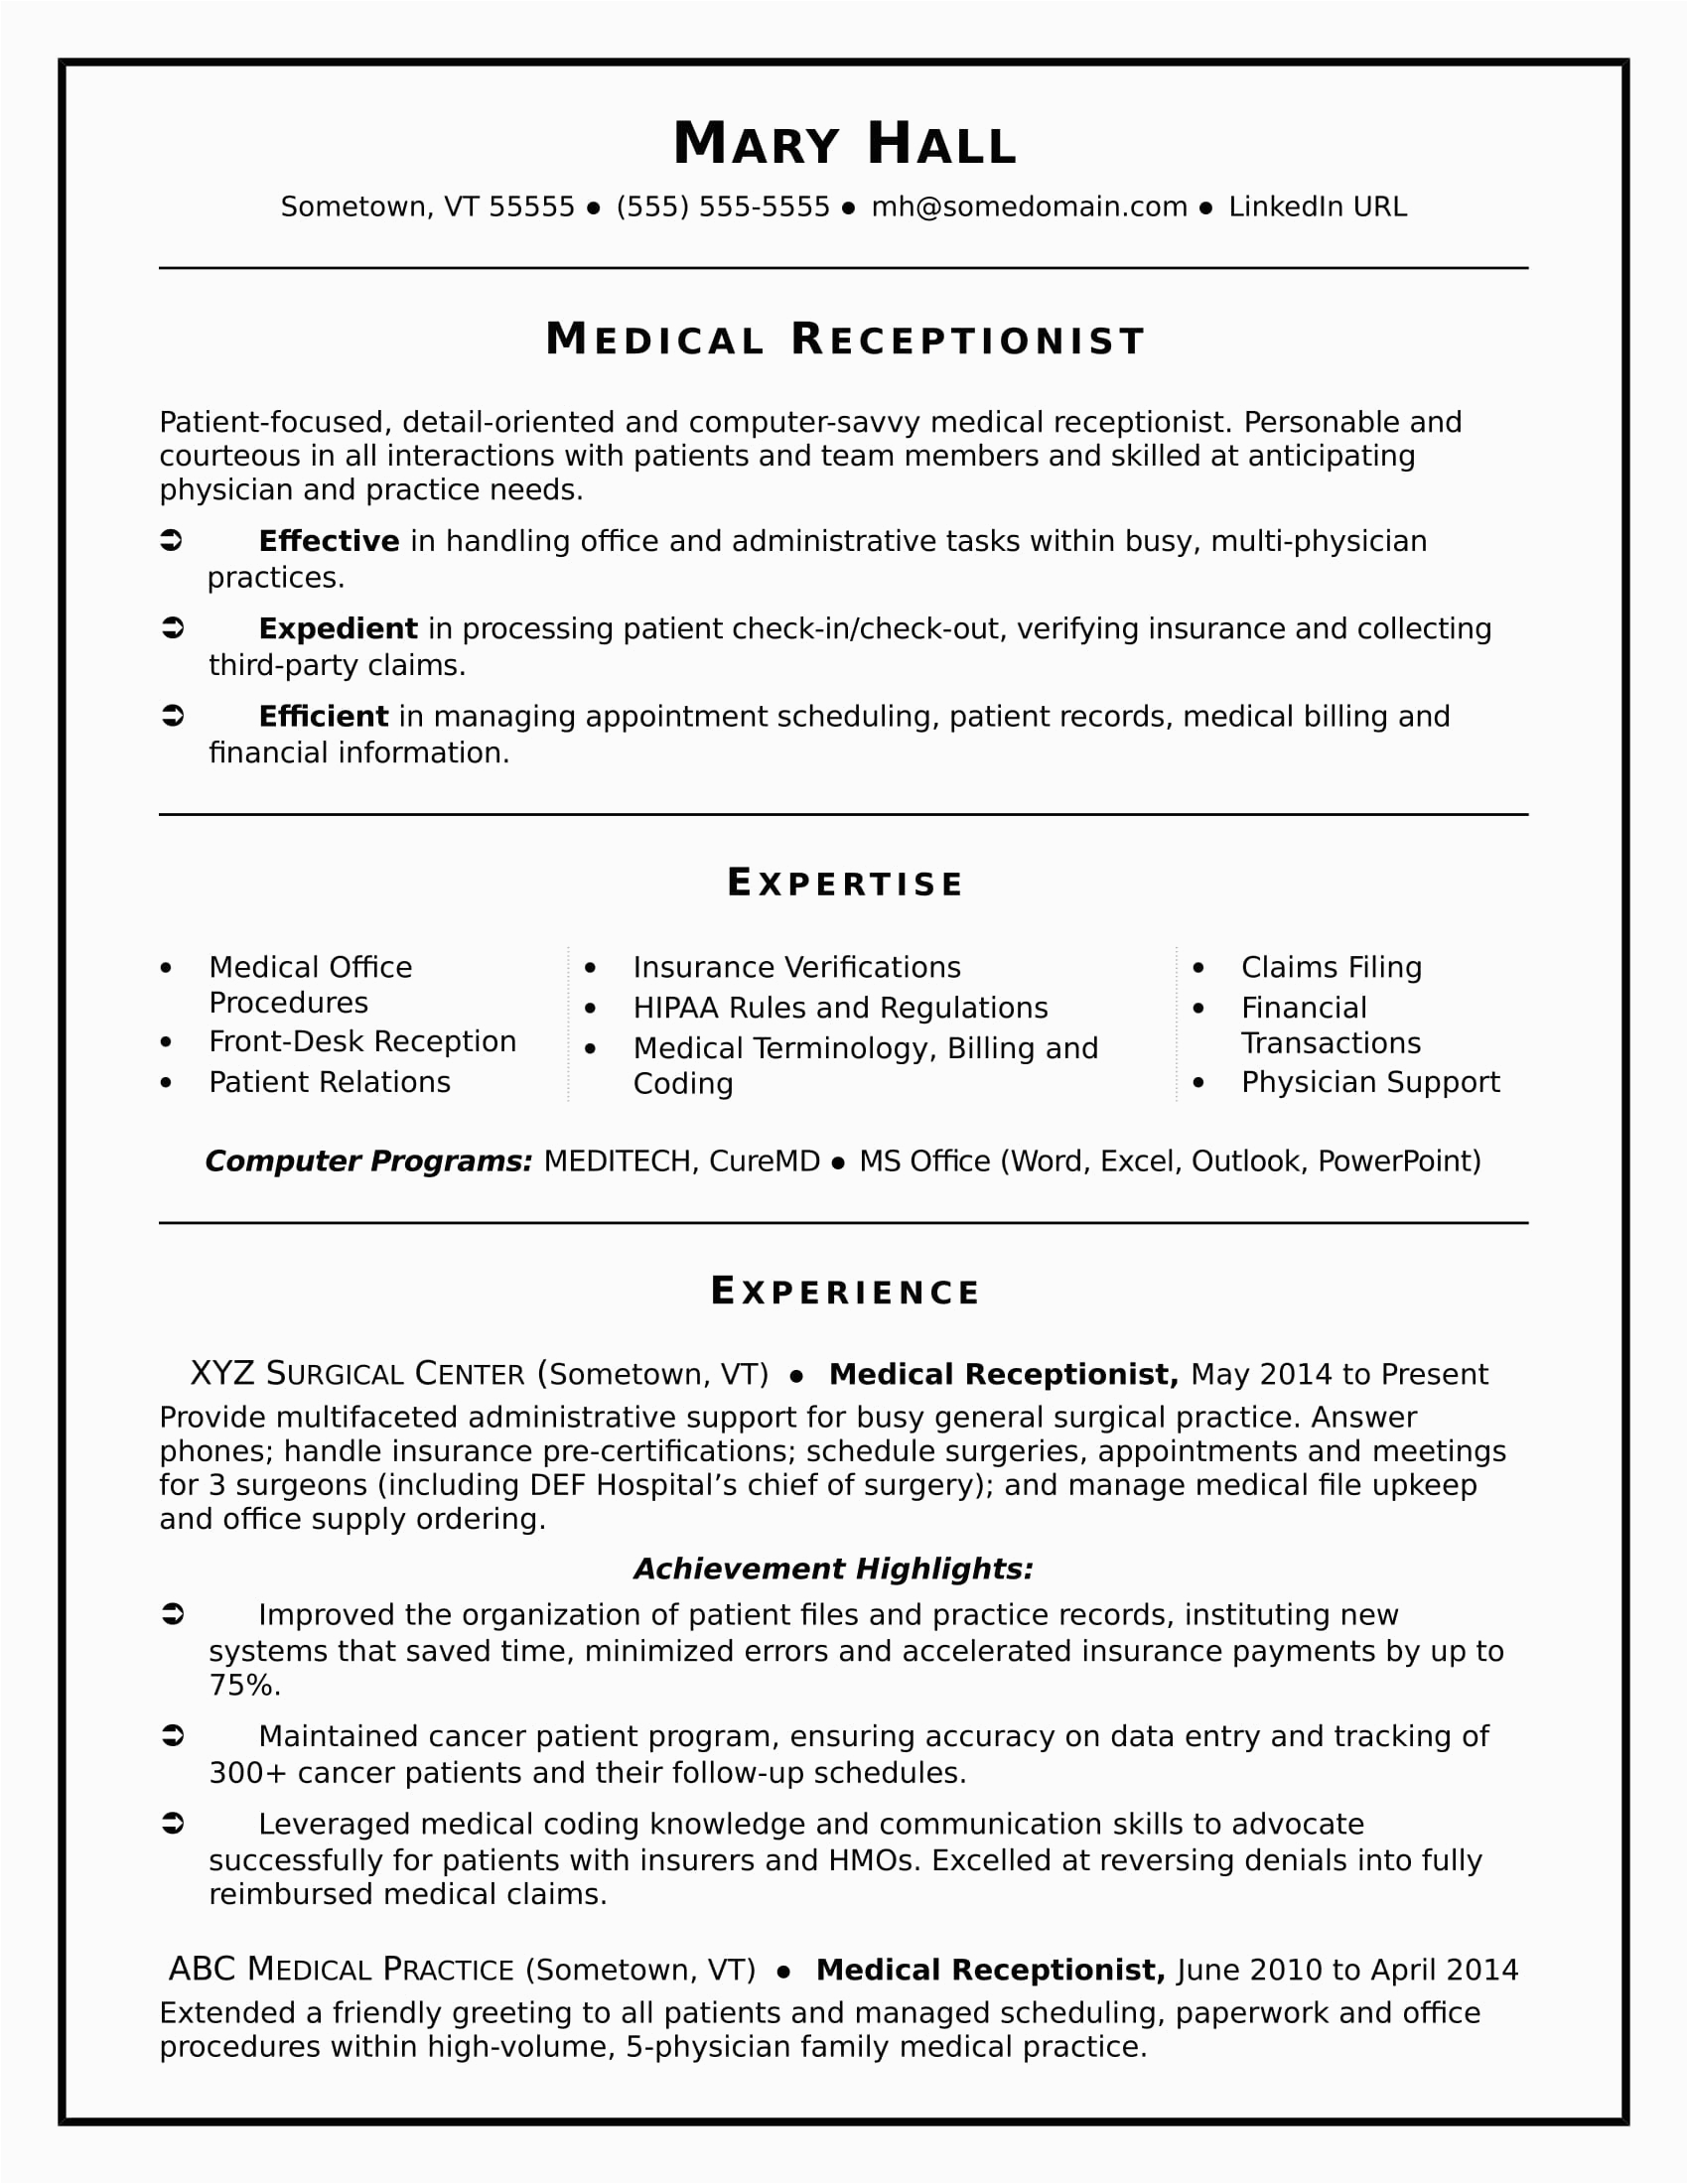 Sample Resume for Receptionist Office assistant Medical Receptionist Resume Sample